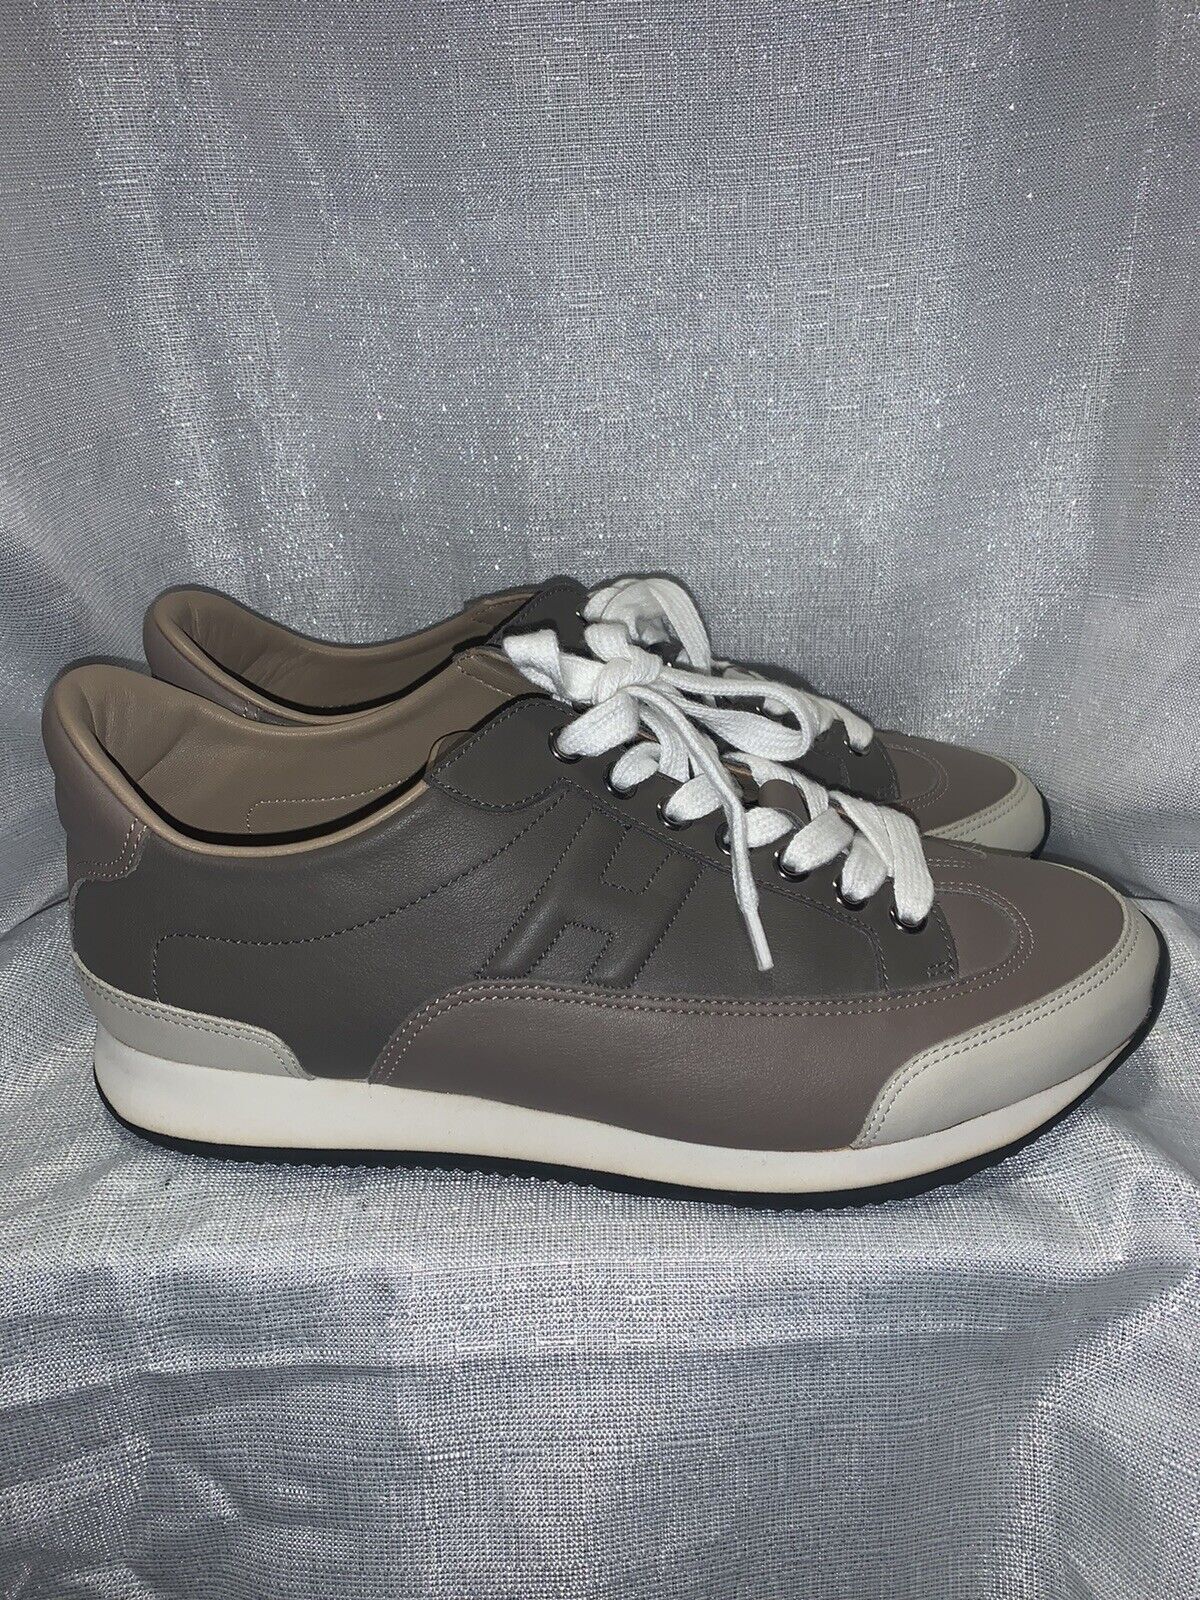 actie Darts Besparing $1025 HERMES H Logo Gray Etain Leather Sneakers Trainers Flats 40 9 - 9.5  US | eBay